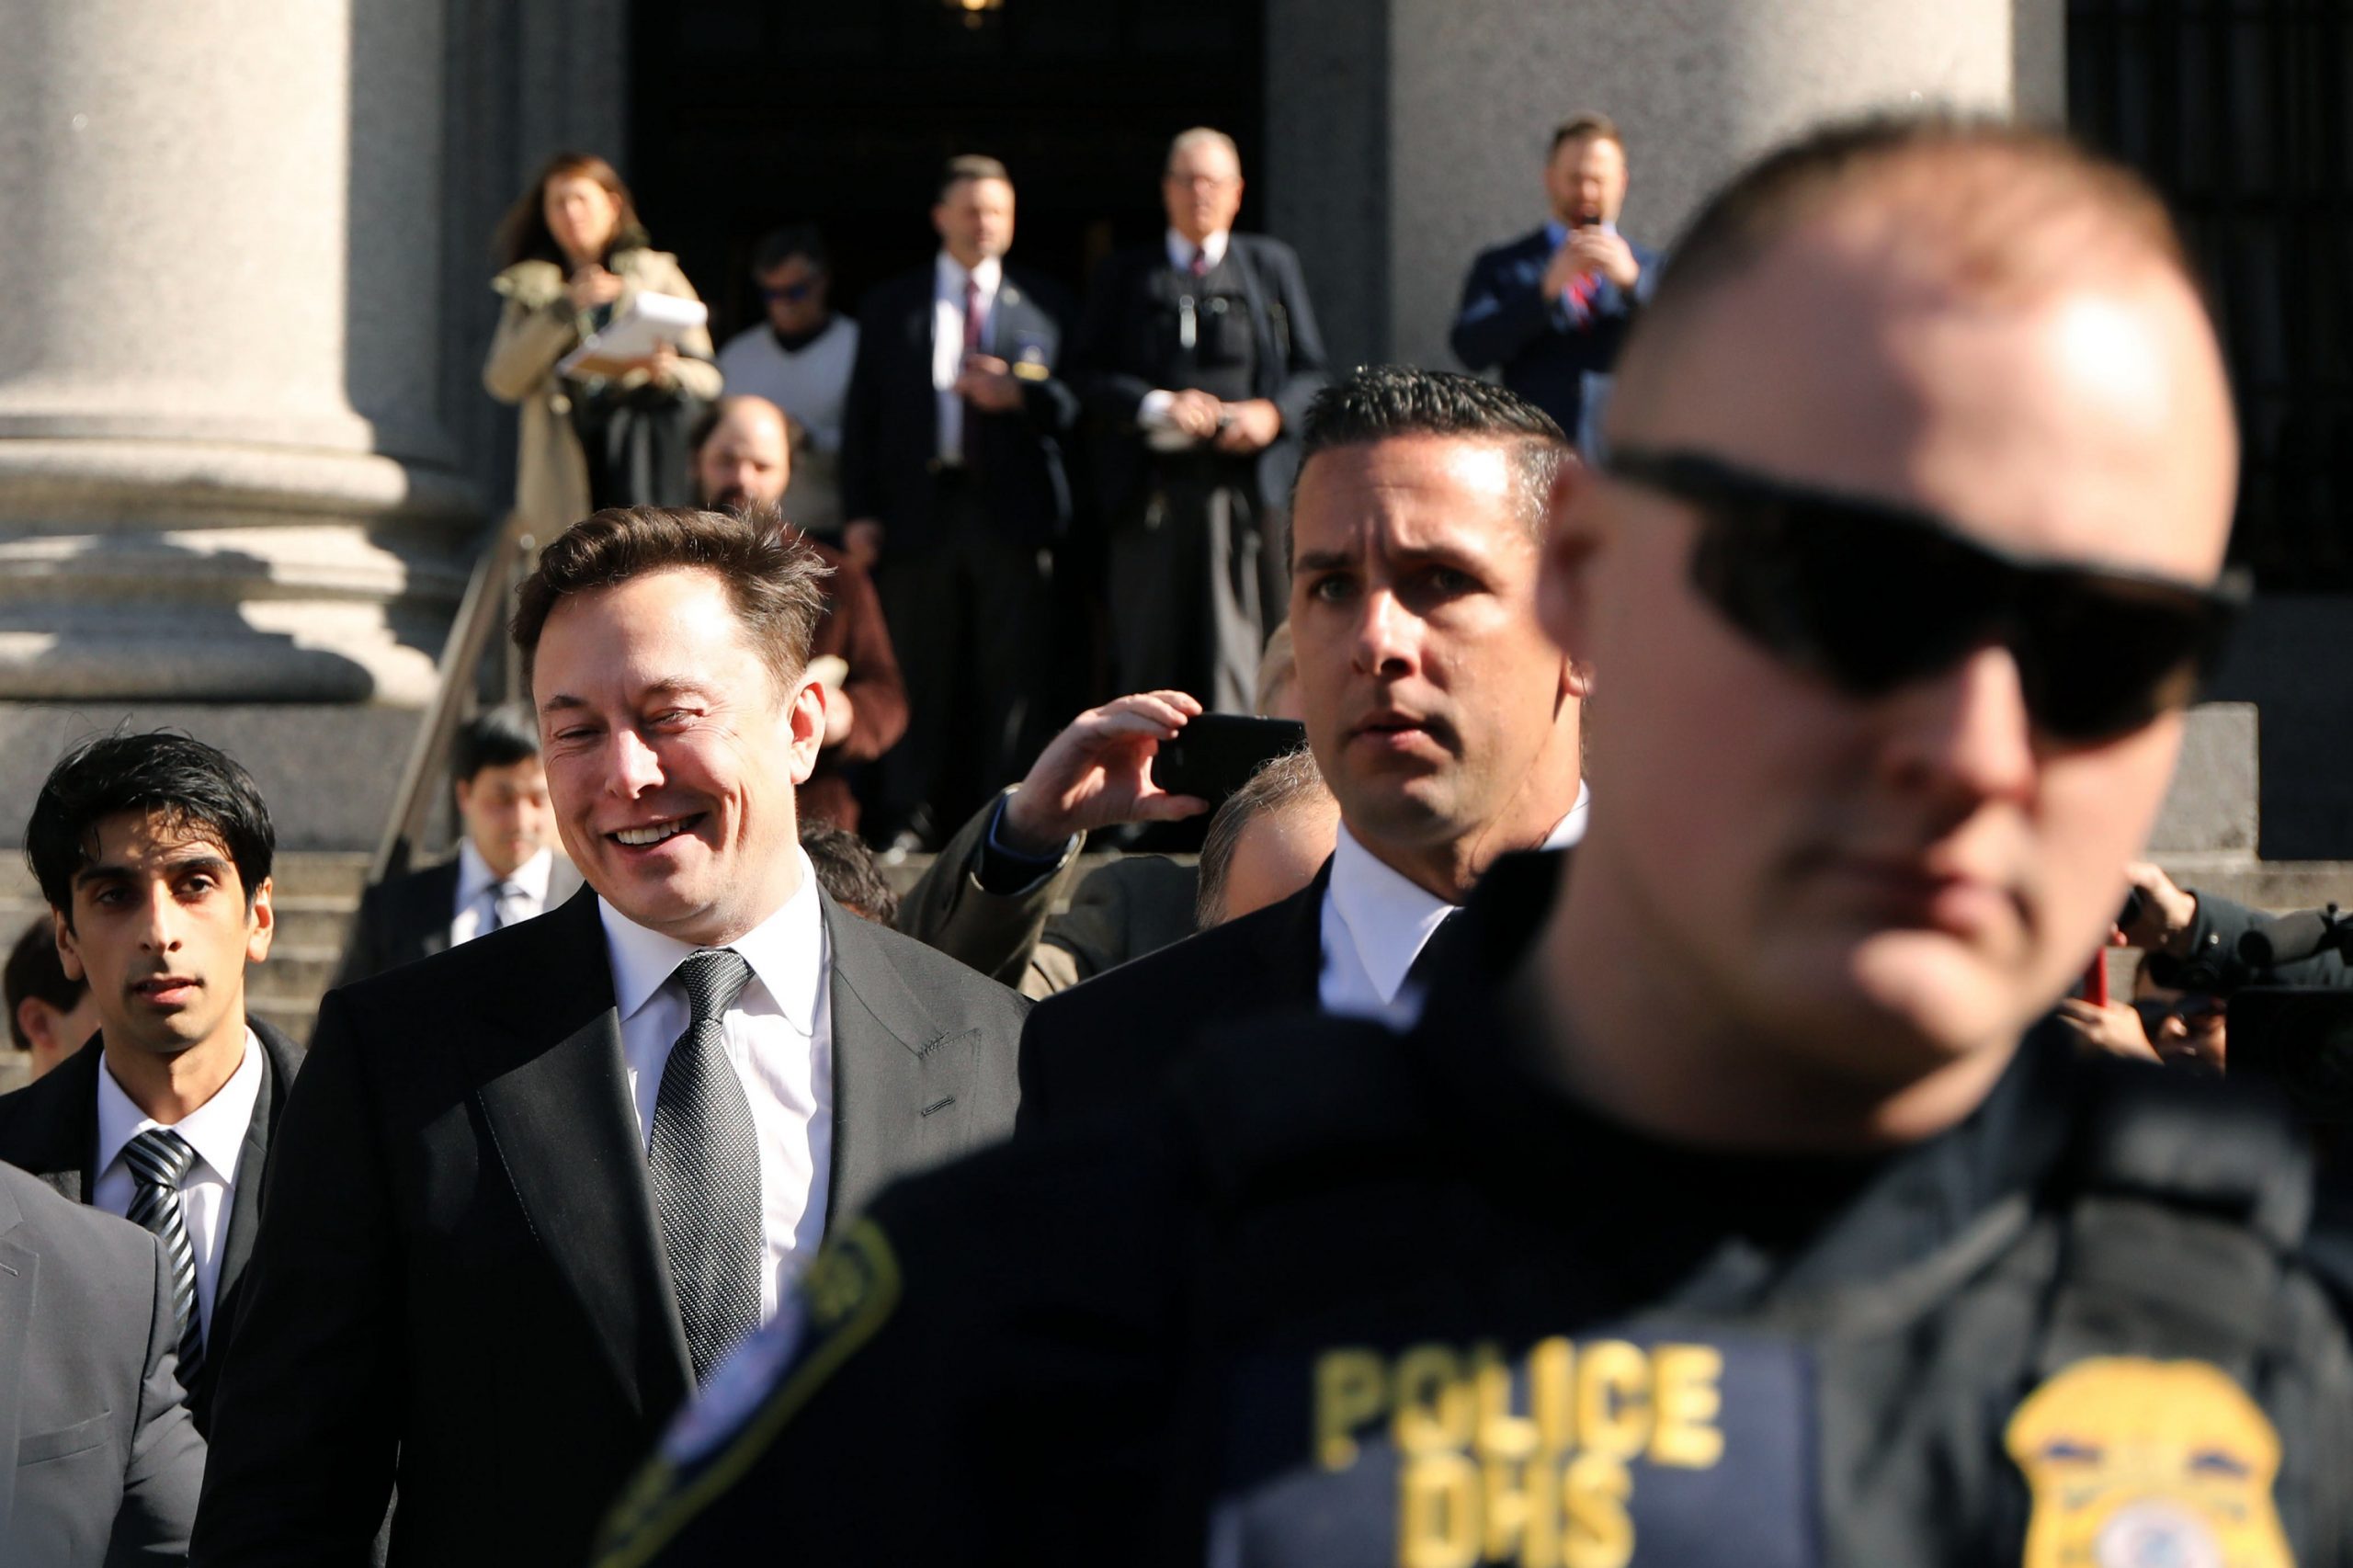 Elon Musk leaving a federal court hearing surrounded by police and security